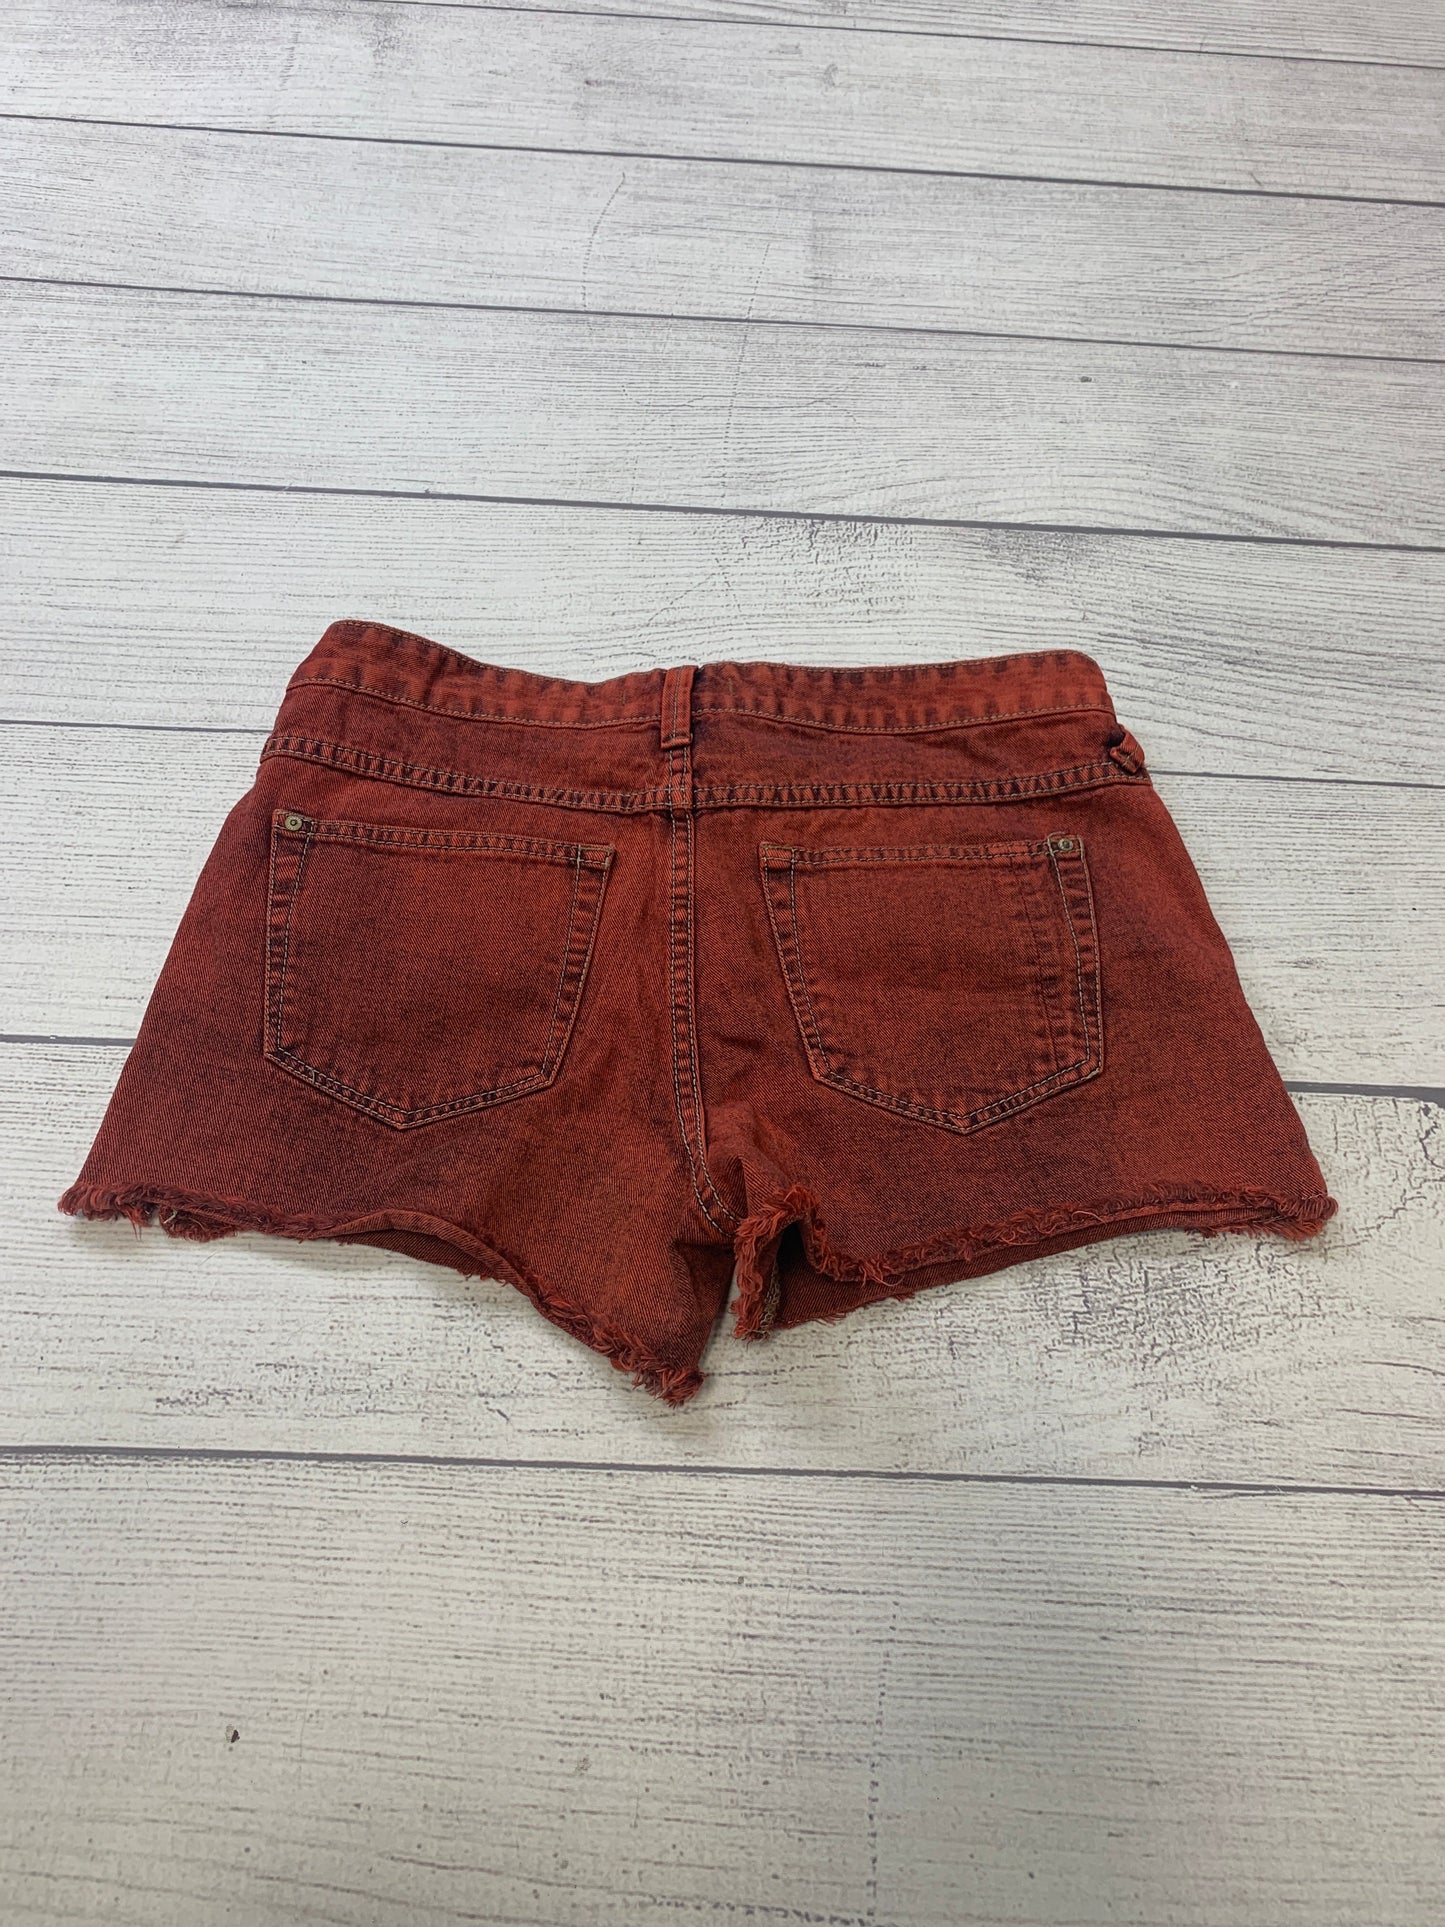 Red Shorts Free People, Size 8